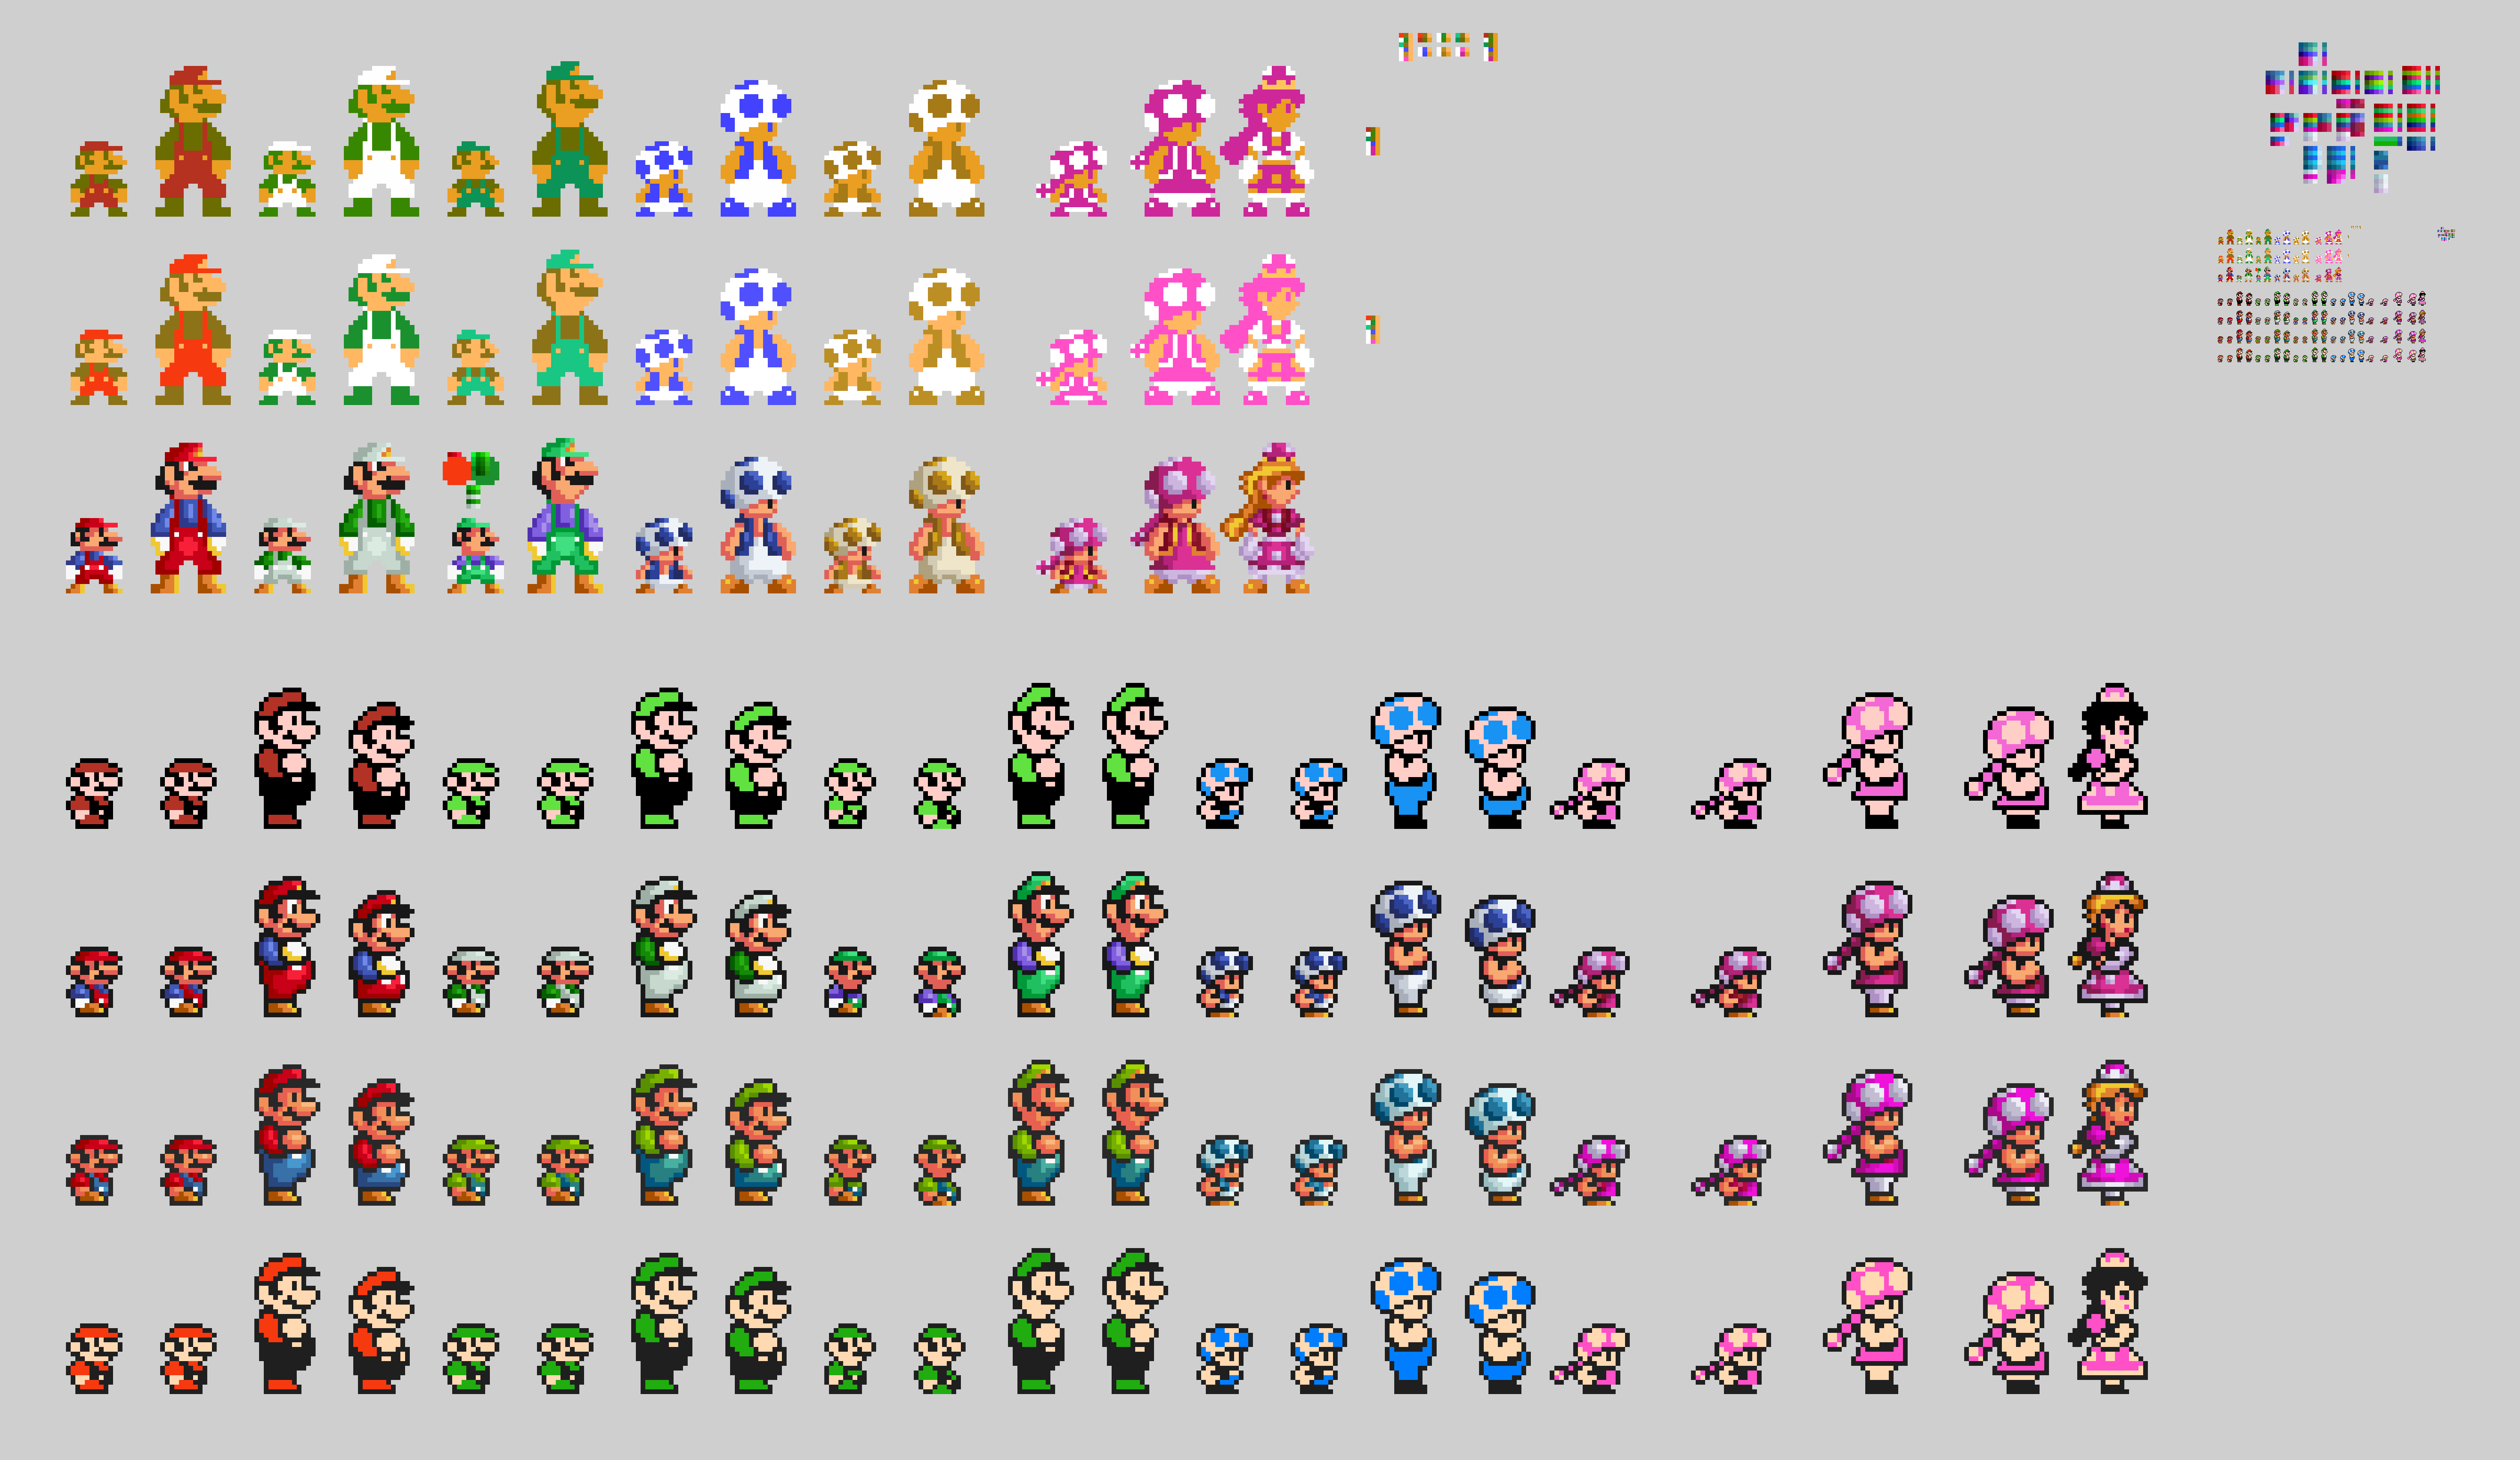 10x What makes Super Mario All-Stars and Advance I by Abbysek on DeviantArt